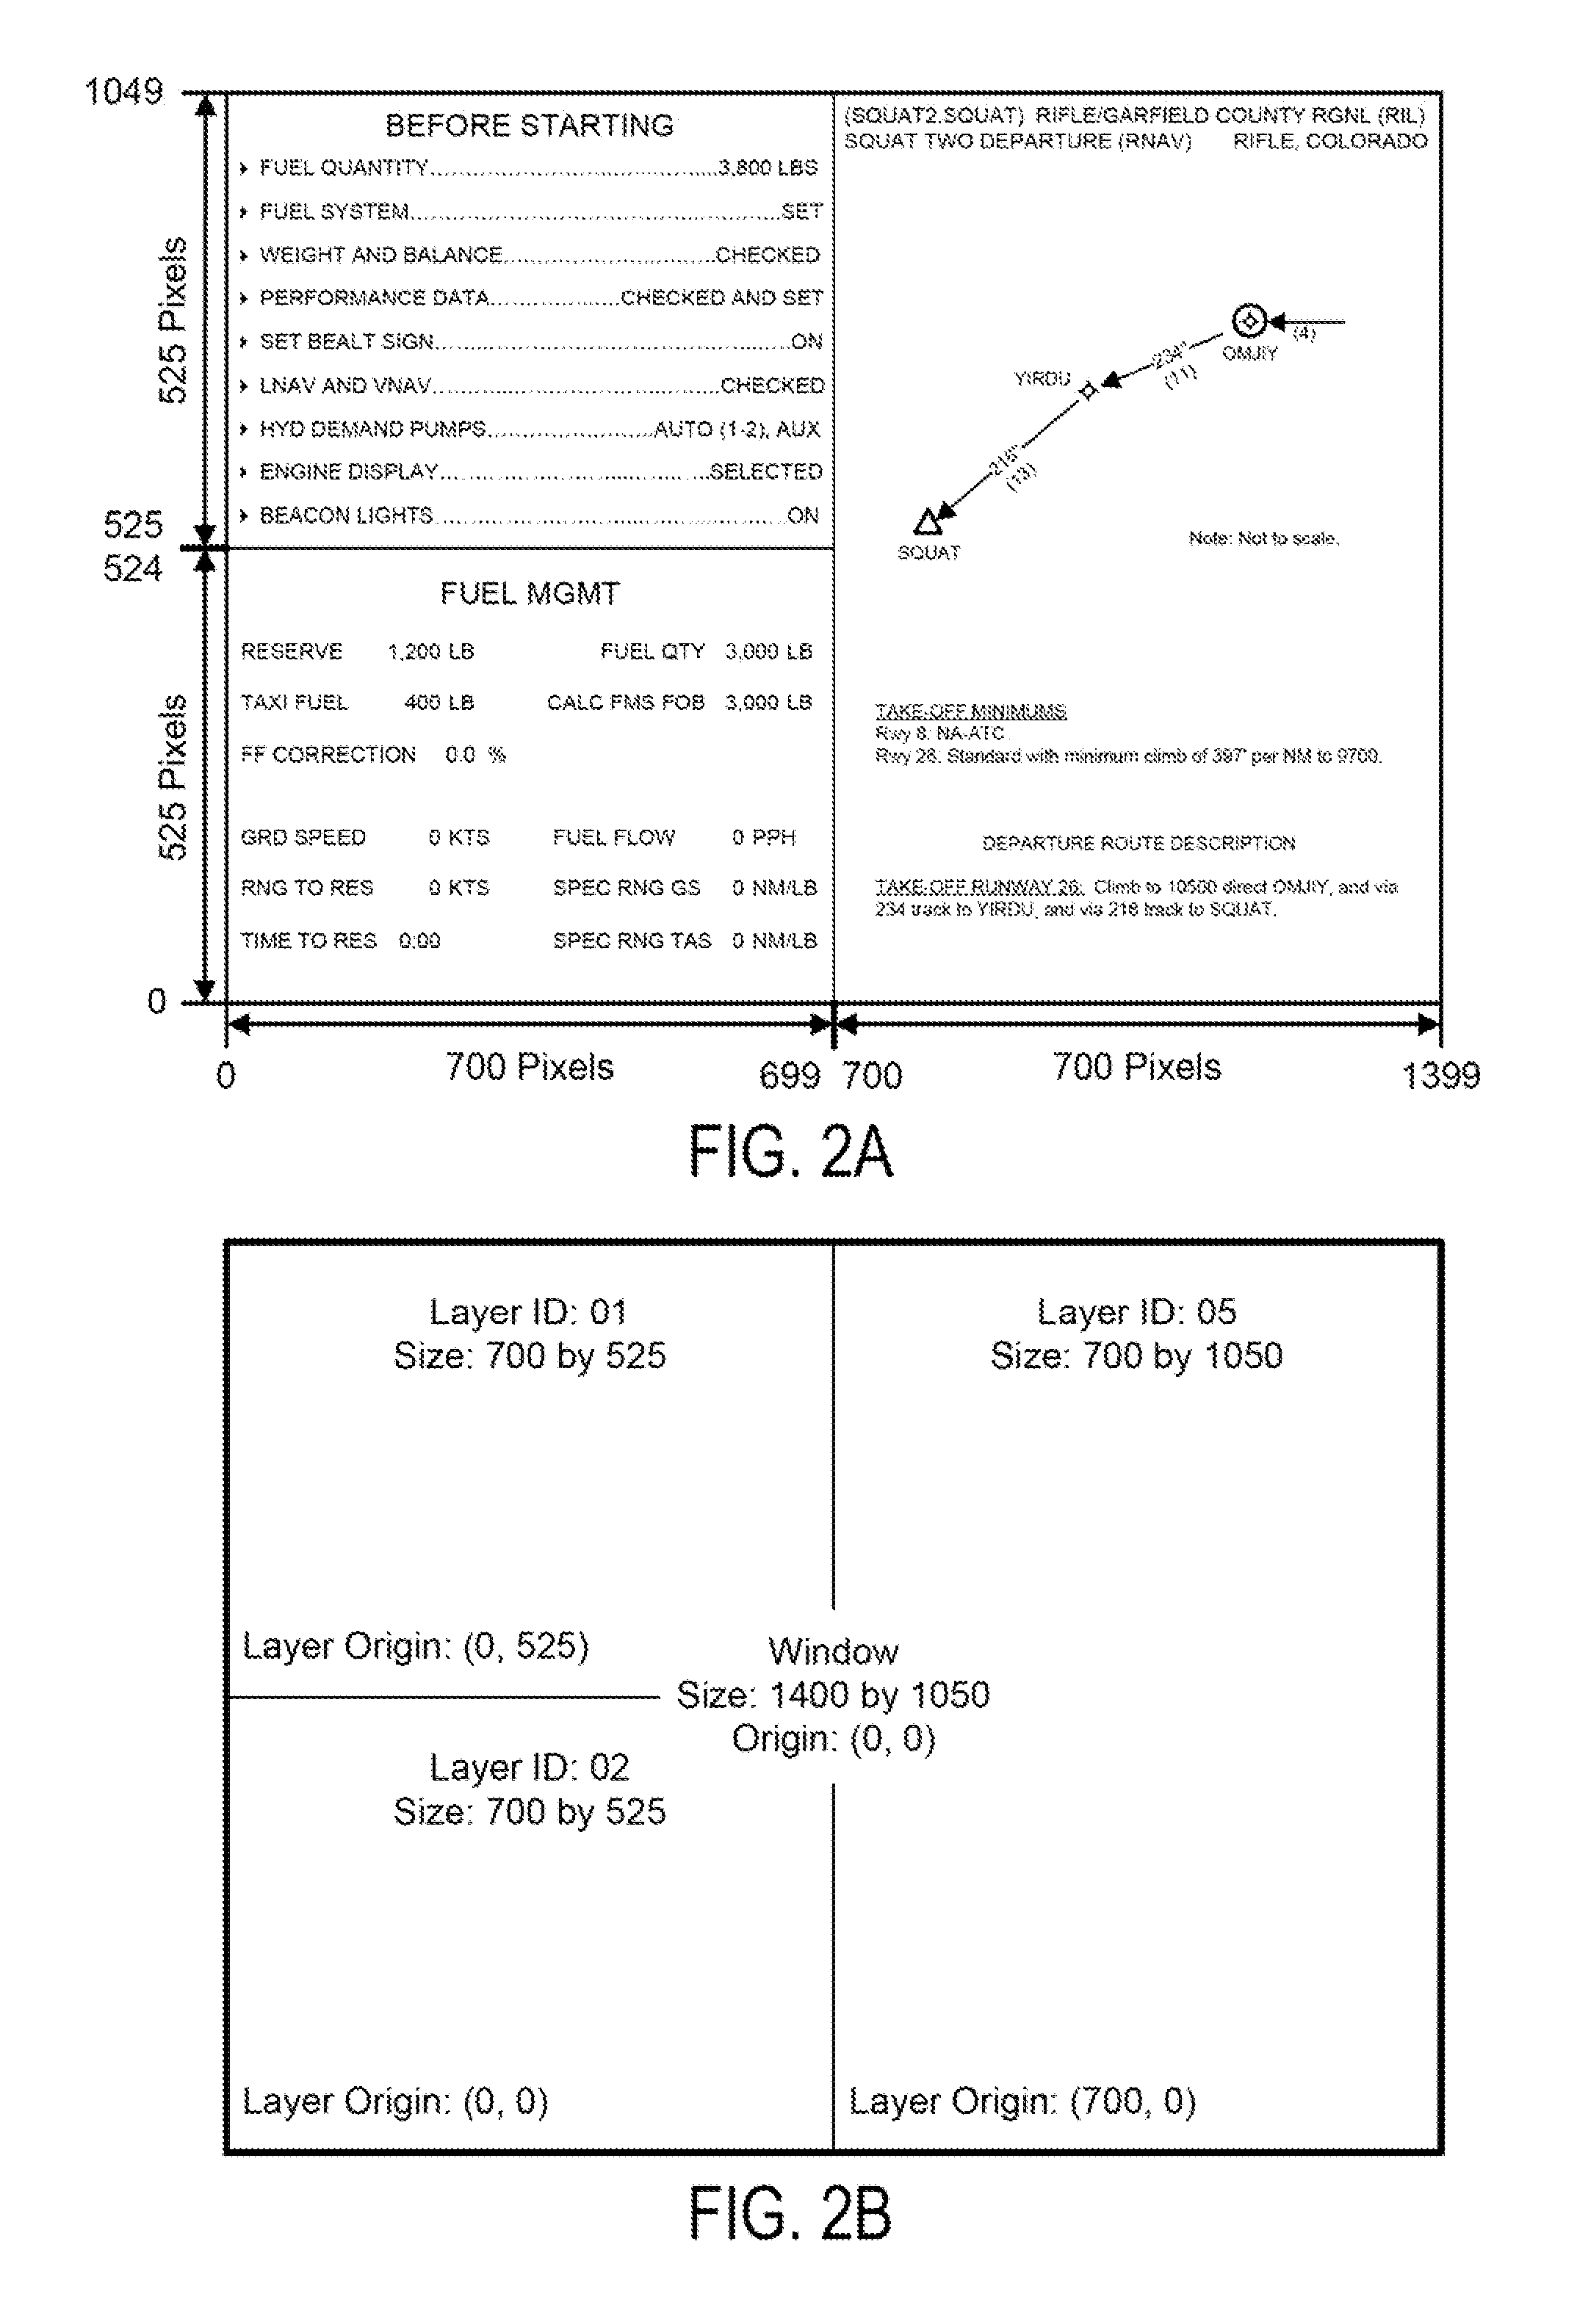 Systems and methods for incorporating virtual network computing into a cockpit display system and controlling a remote aircraft system with the VNC-incorporated CDS